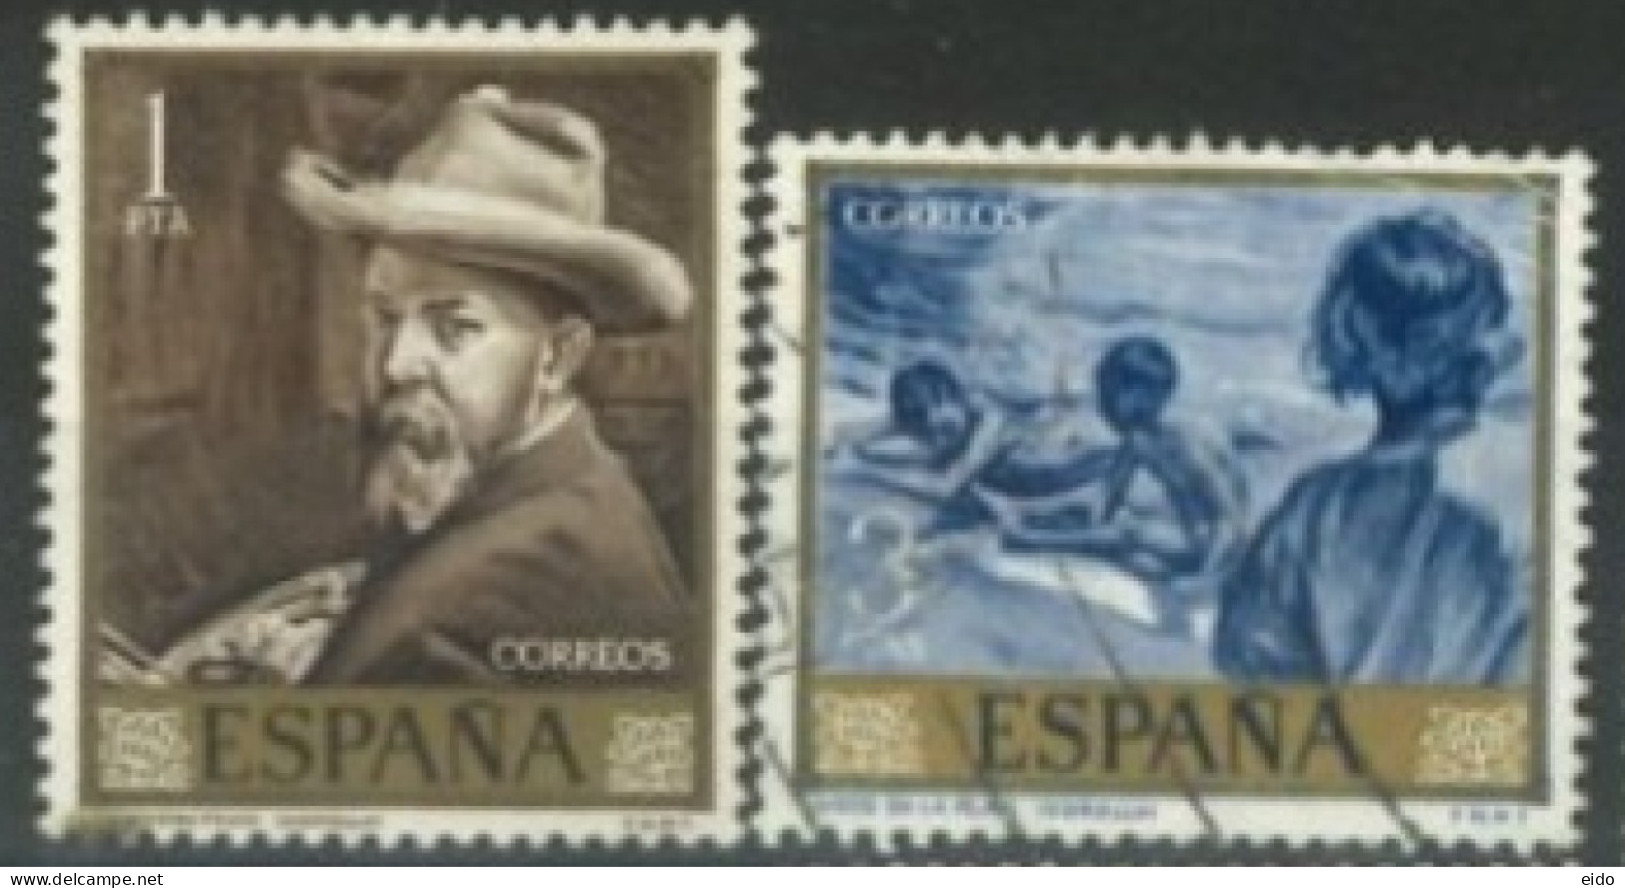 SPAIN, 1964, SOROLLA PAINTINGS STAMPS SET OF 2, # 1219, & 1222, USED. - Used Stamps